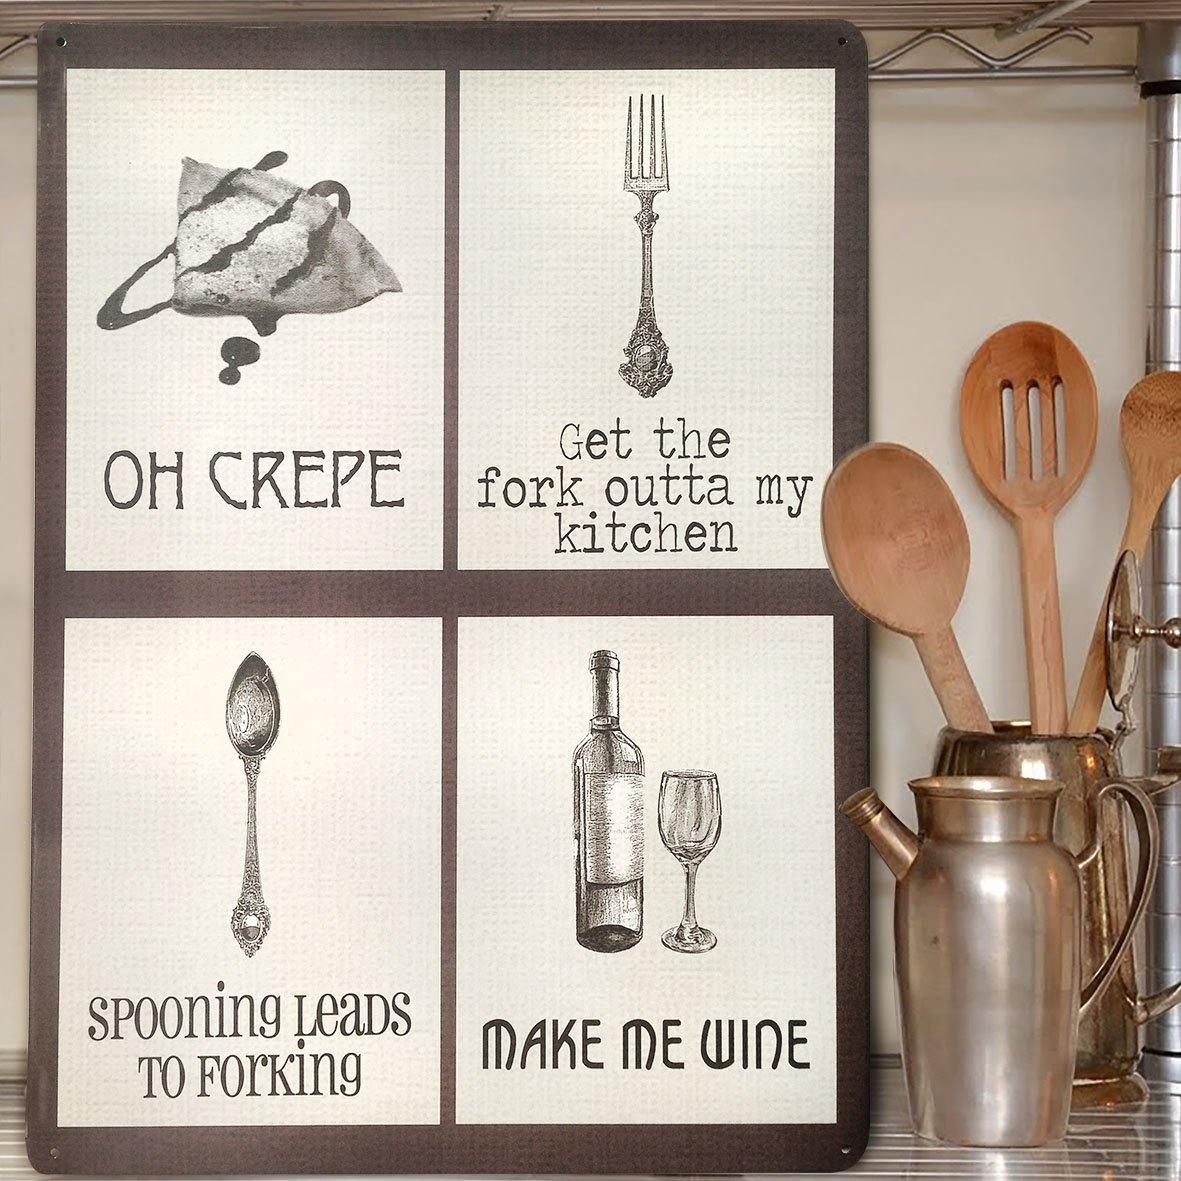 Oh Crepe Quirky and hilarious Metal Wall Sign - TwoBeeps.co.uk